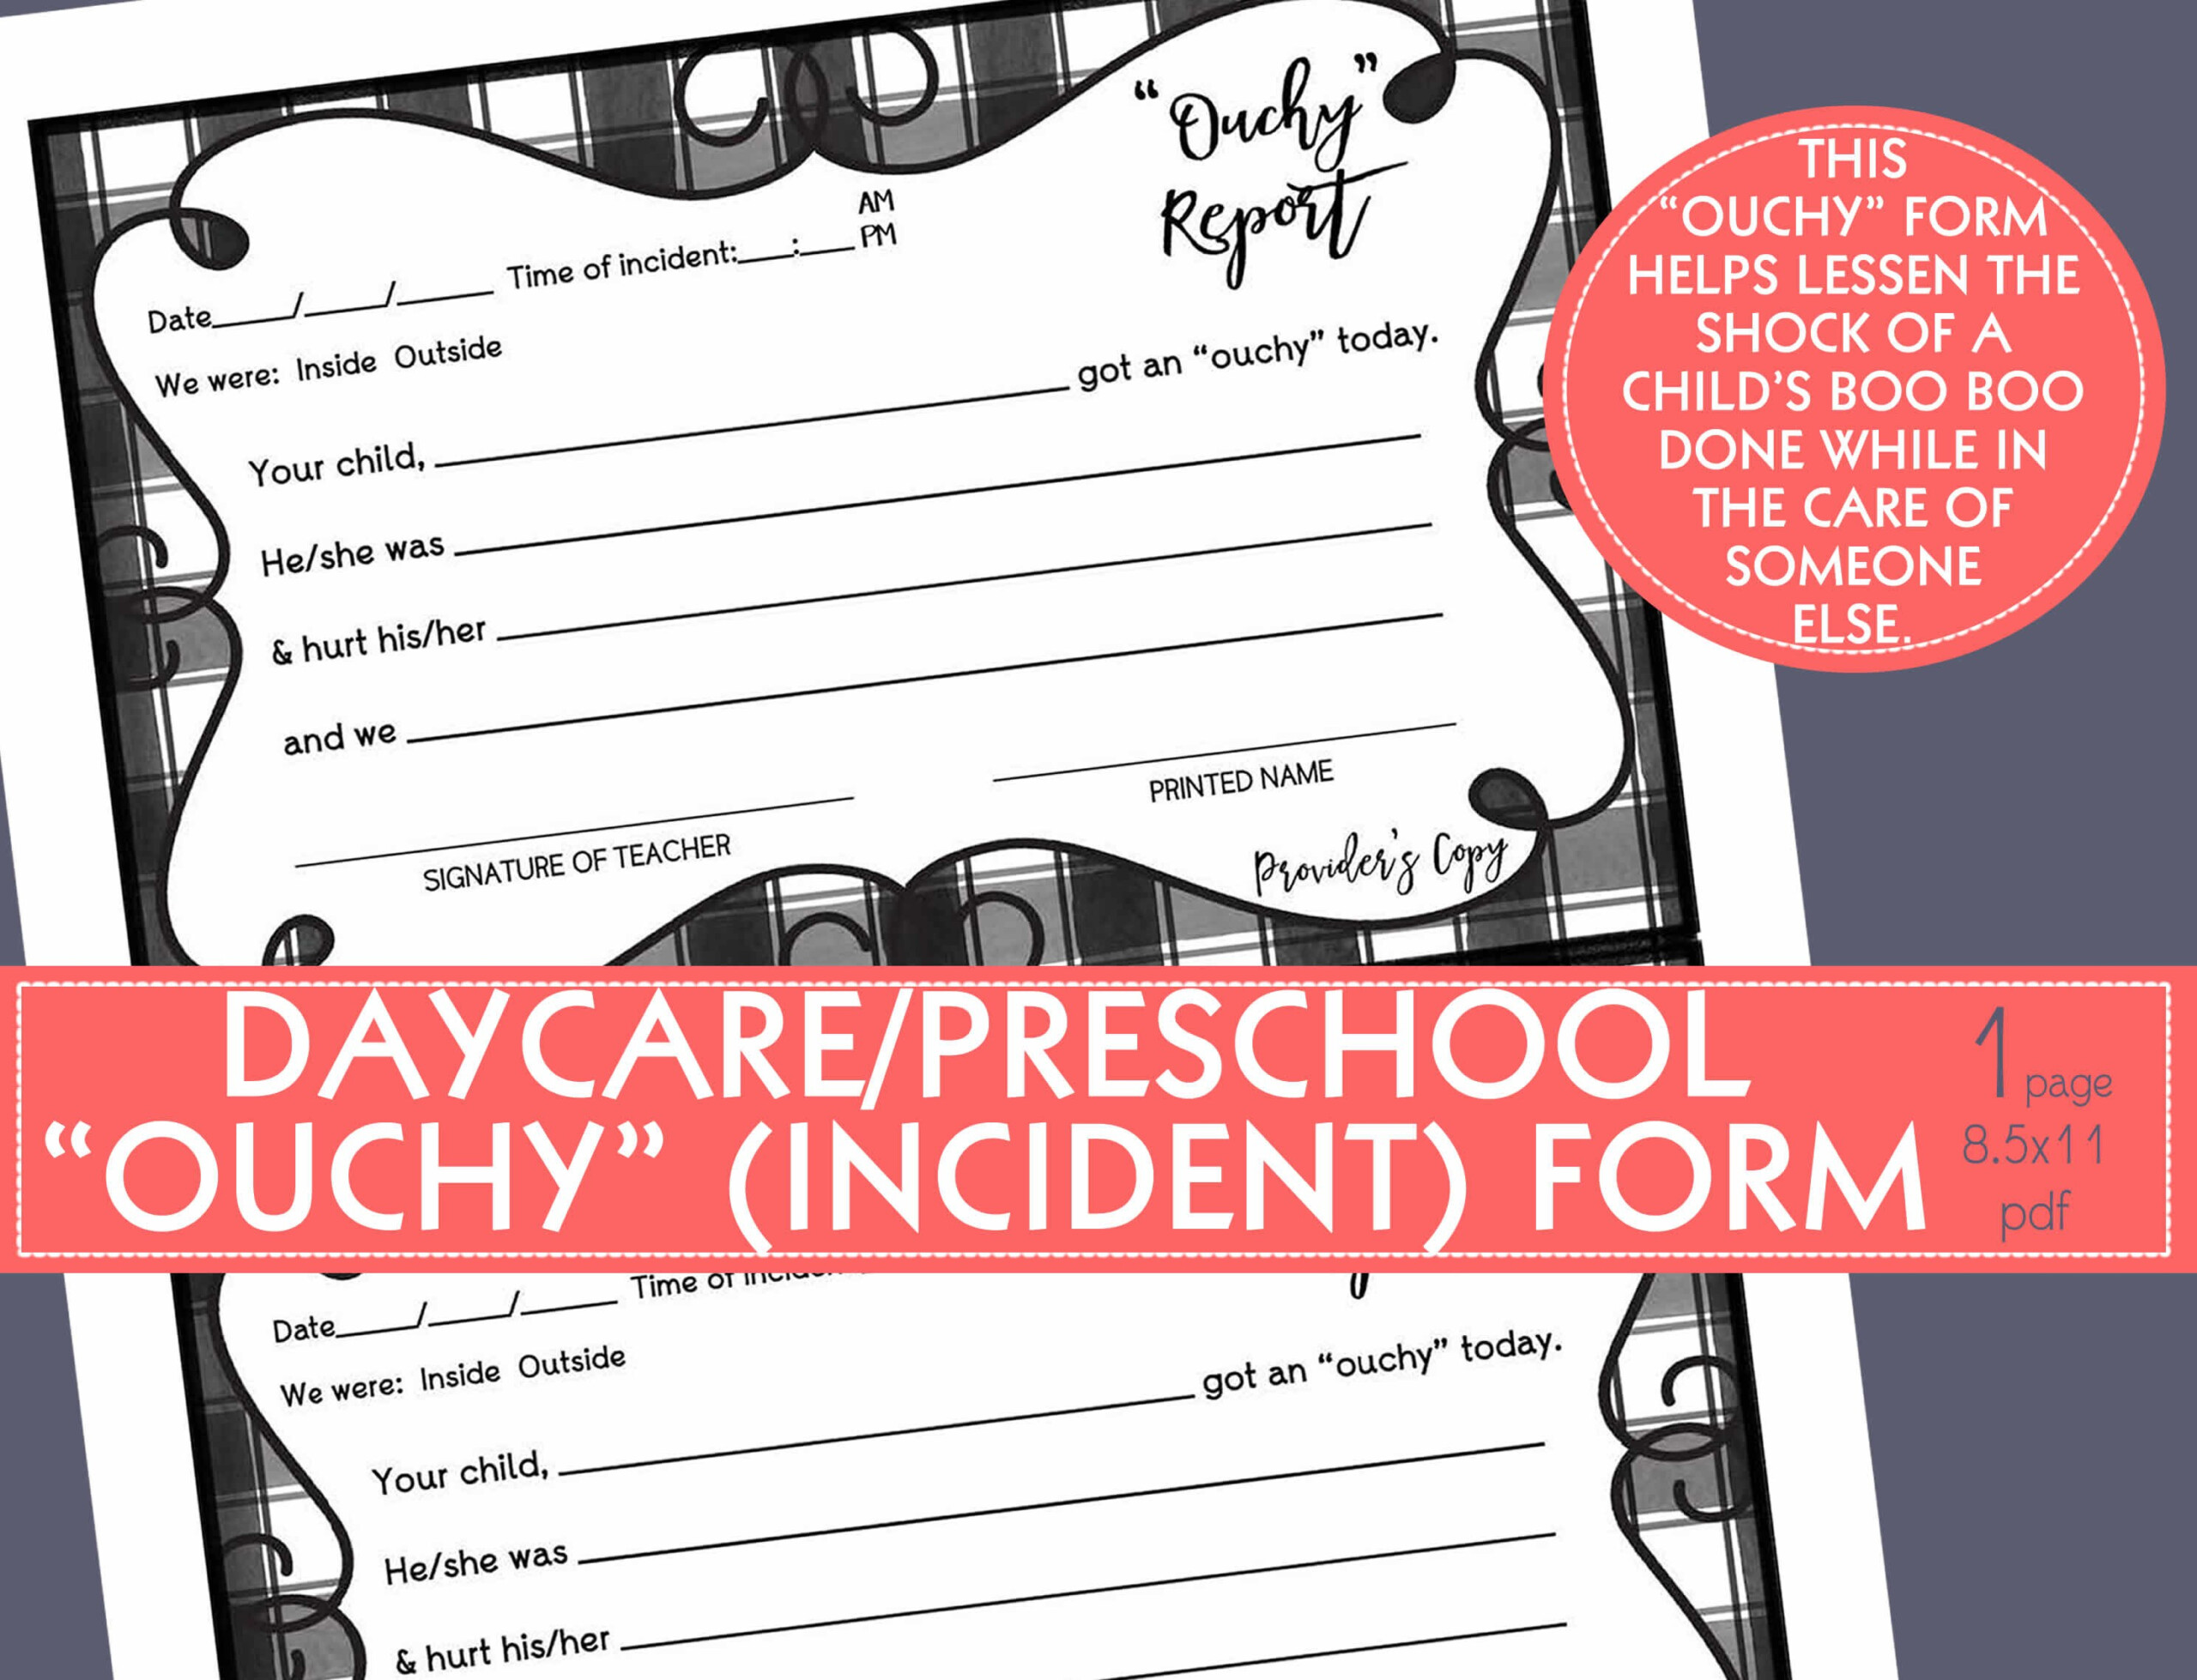 DAYCARE FORM Ouchy Report Accident Form Incident Etsy Canada